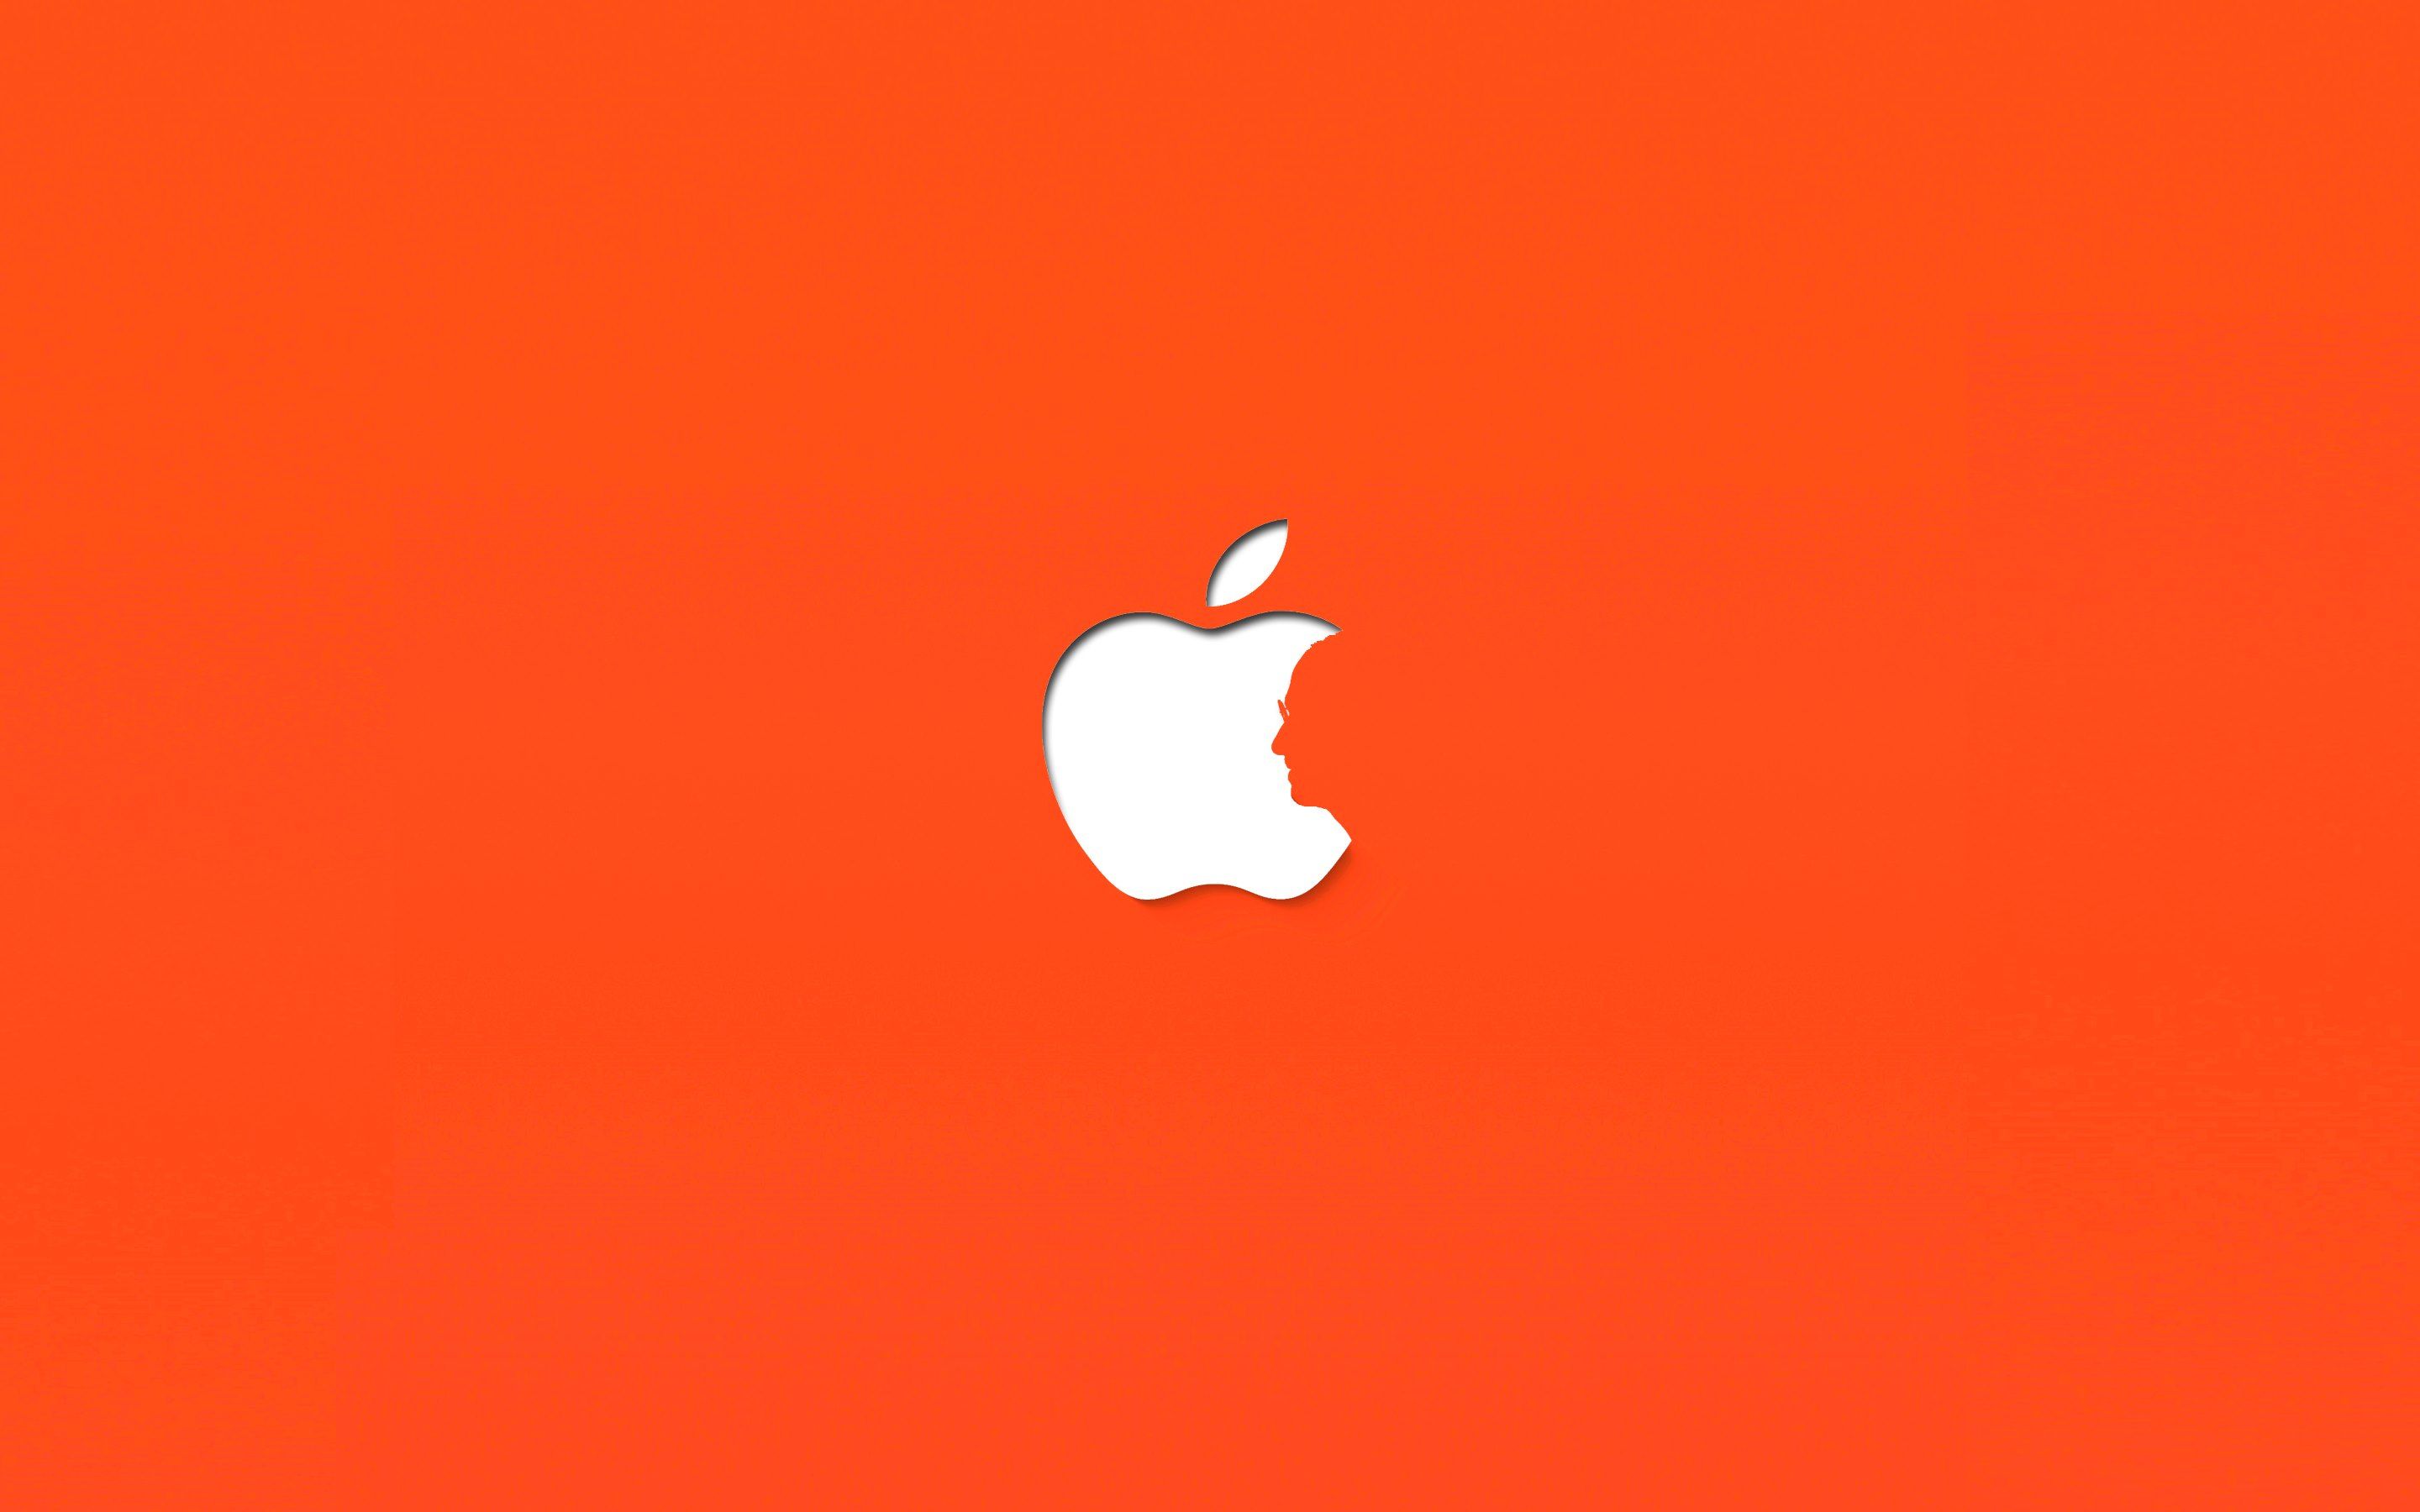 Stylish Minimal Design Inspired by Apple HD Wallpapers. 4K Backgrounds